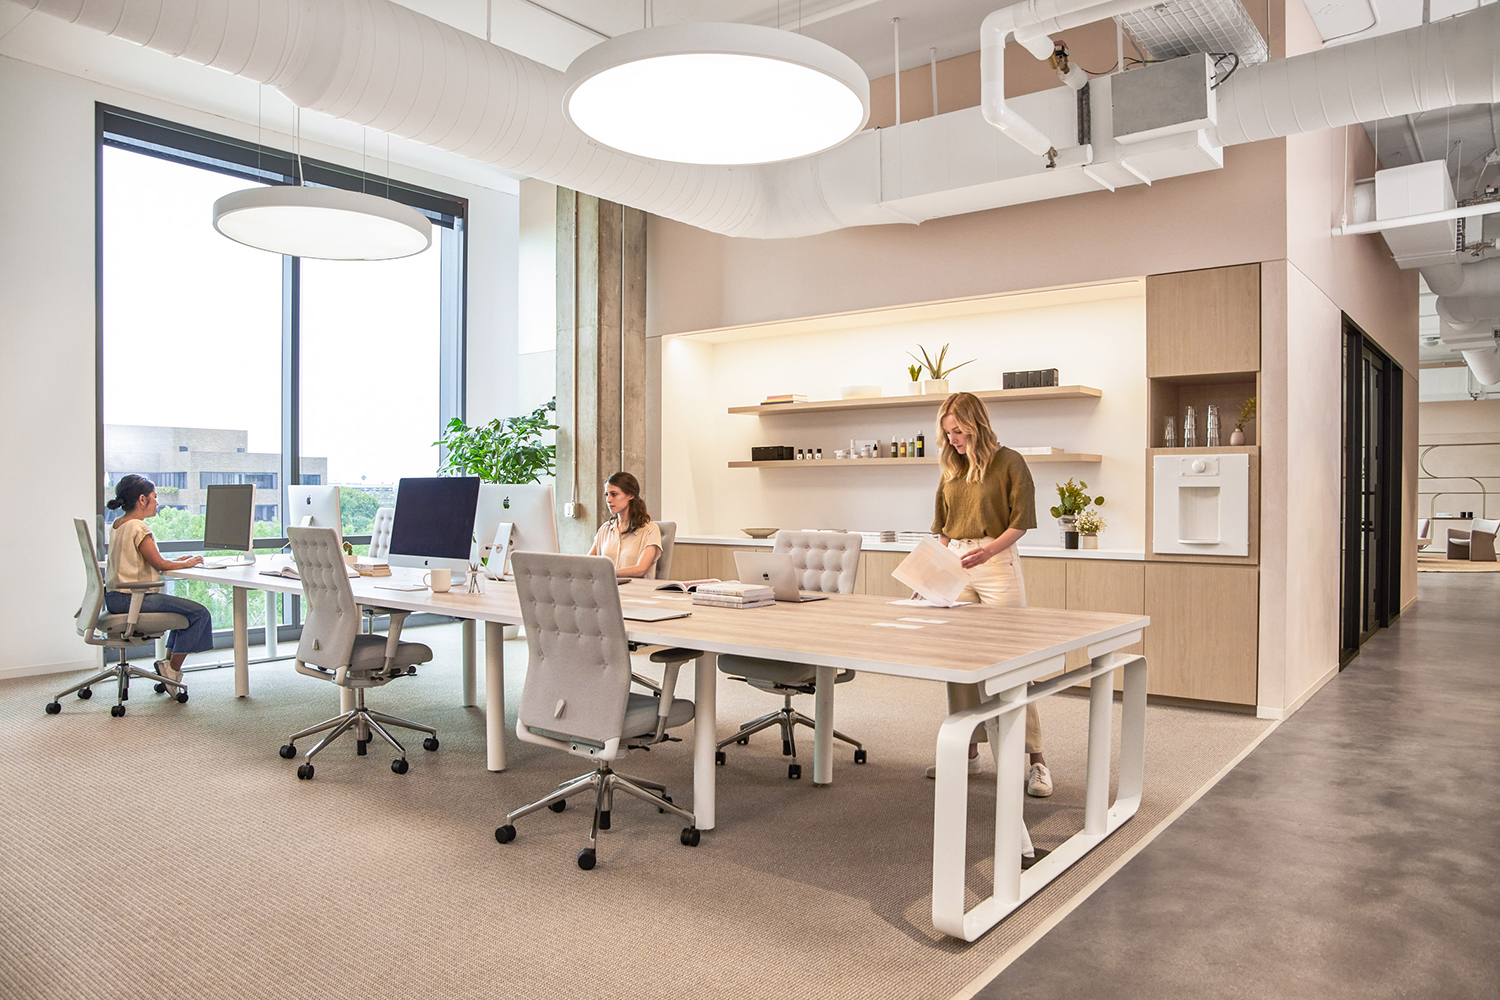 Walk That Talk: 5 Pro Tips To Have A Clean Office Carpet!